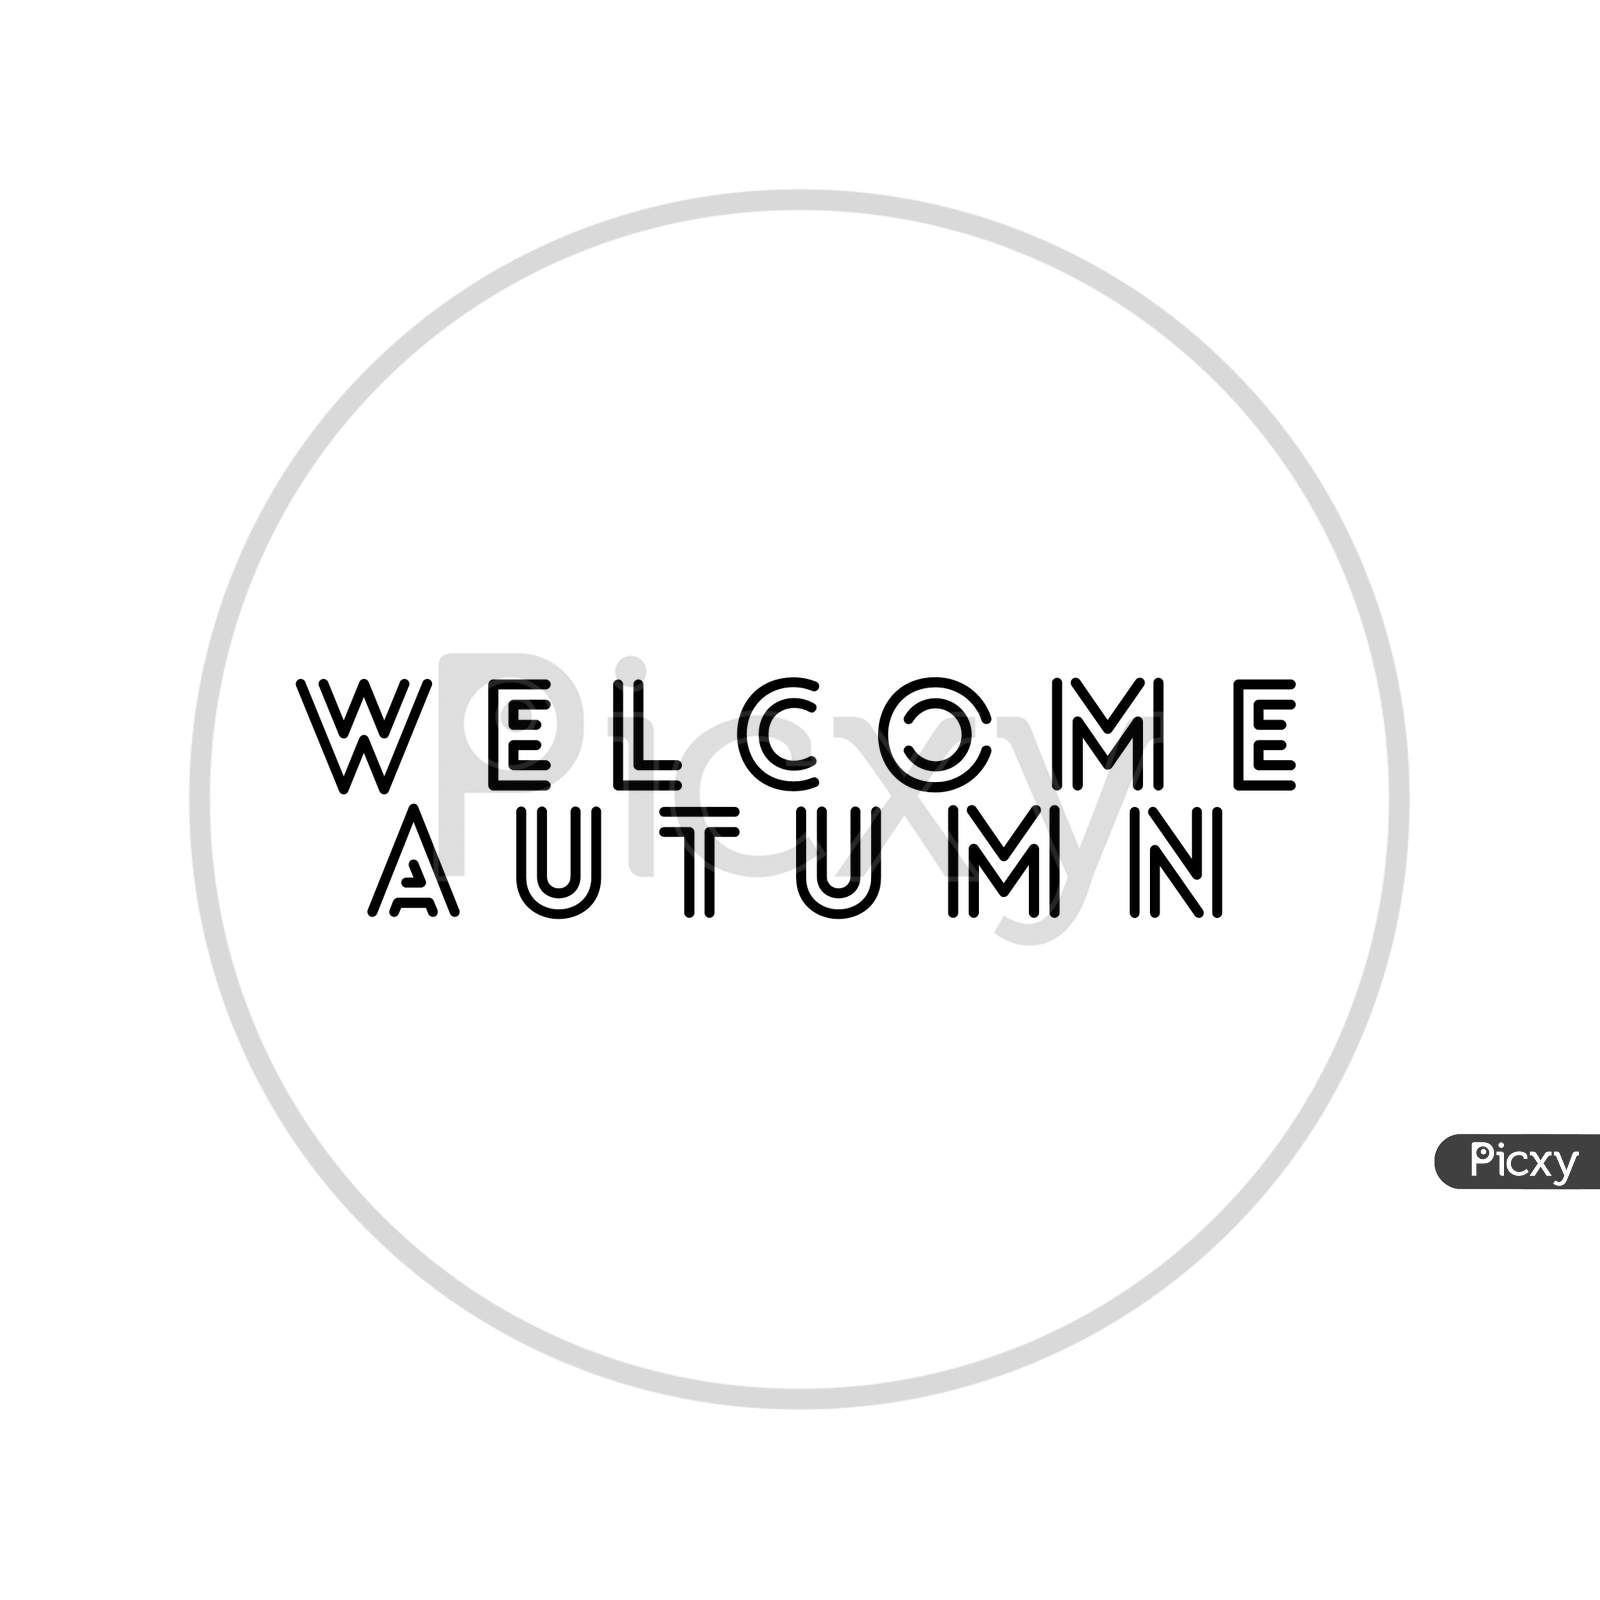 Image With A Text "Welcome Autumn"